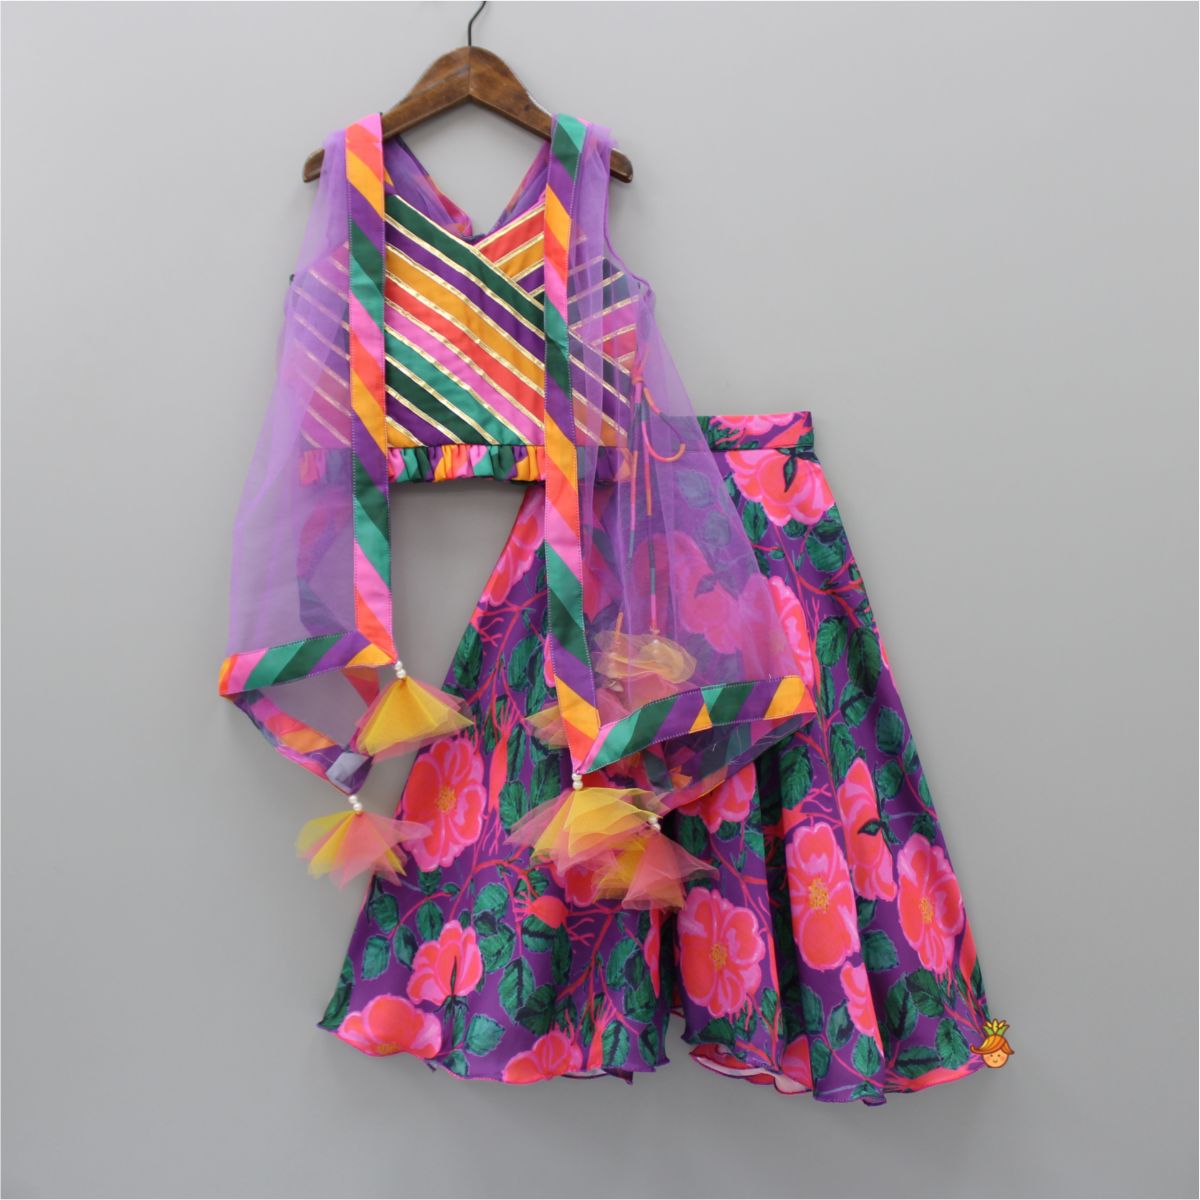 Stylish Diagonal Gota Lace Work Striped Multicolour Cape Top And Floral Printed Palazzo